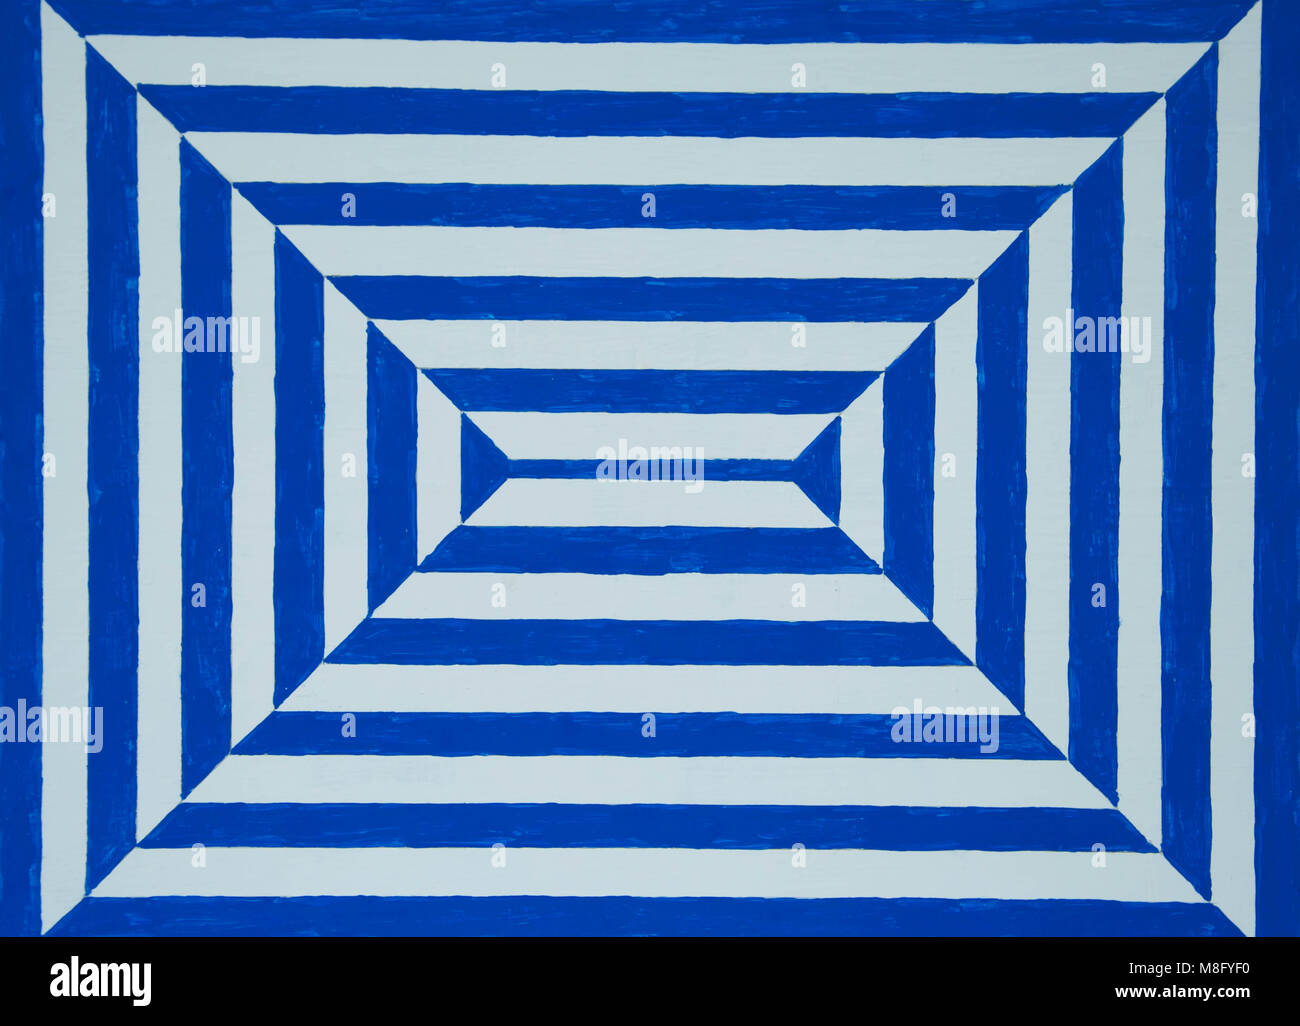 Hand painted blue and white optical illusion Stock Photo